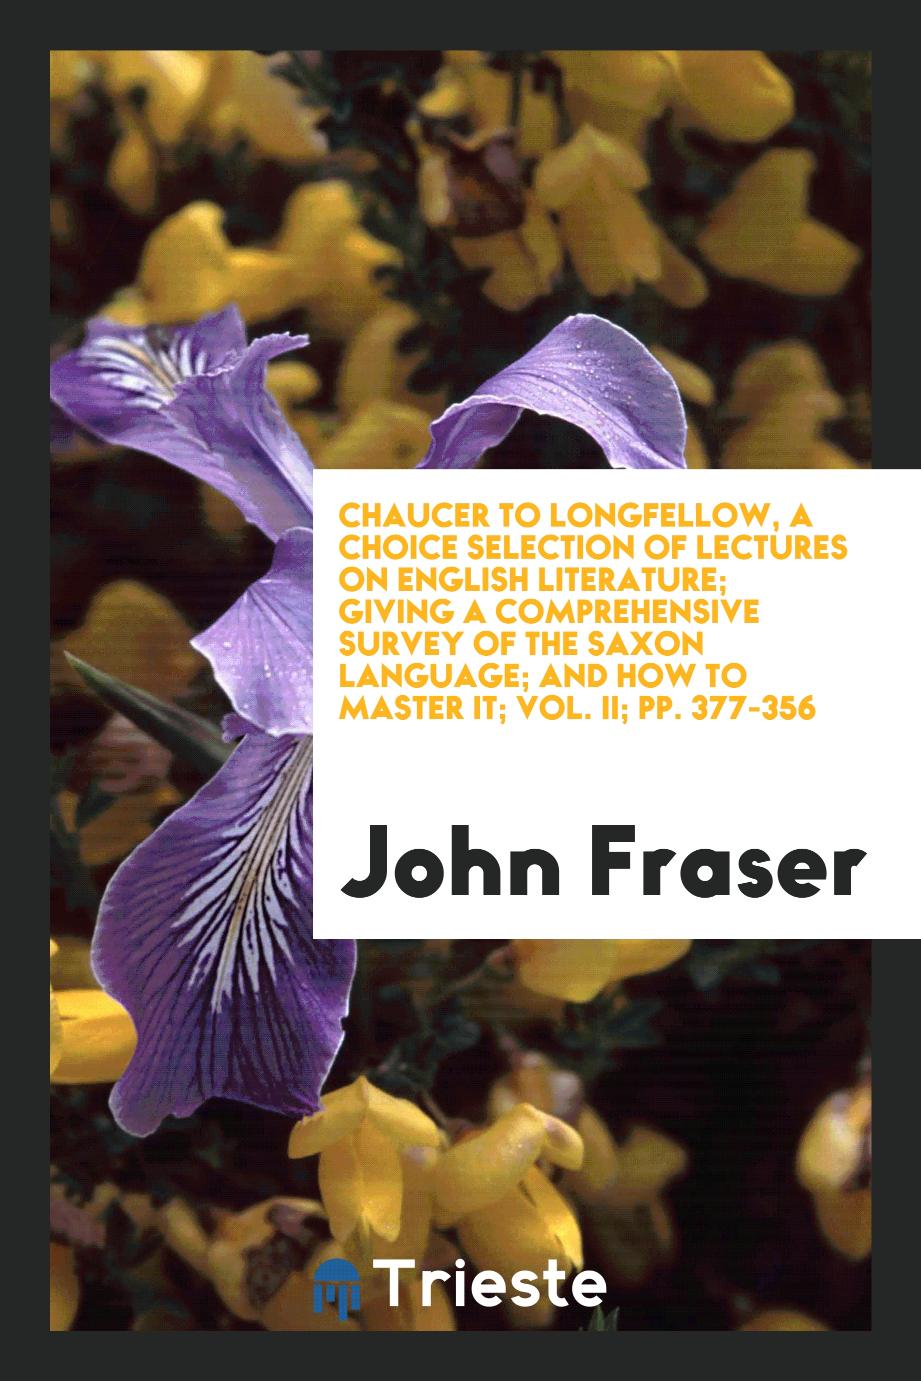 Chaucer to Longfellow, a choice selection of lectures on English literature; giving a comprehensive survey of the Saxon language; and how to master it; Vol. II; pp. 377-356